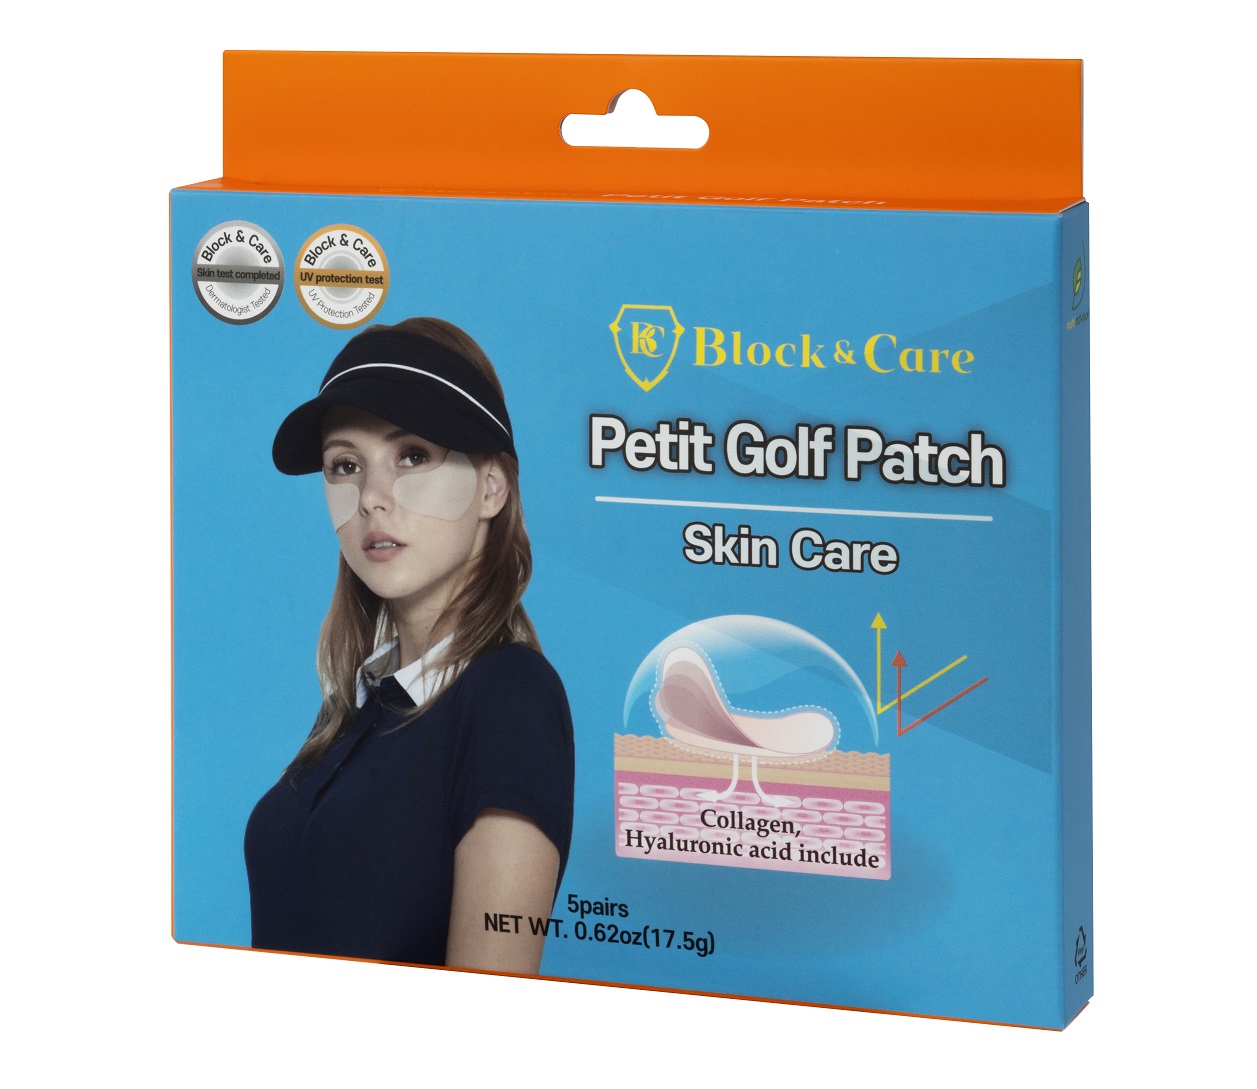 Block_Care hydrogel Golf Patches for UV Protection and skincare _5 Pairs _  Box_